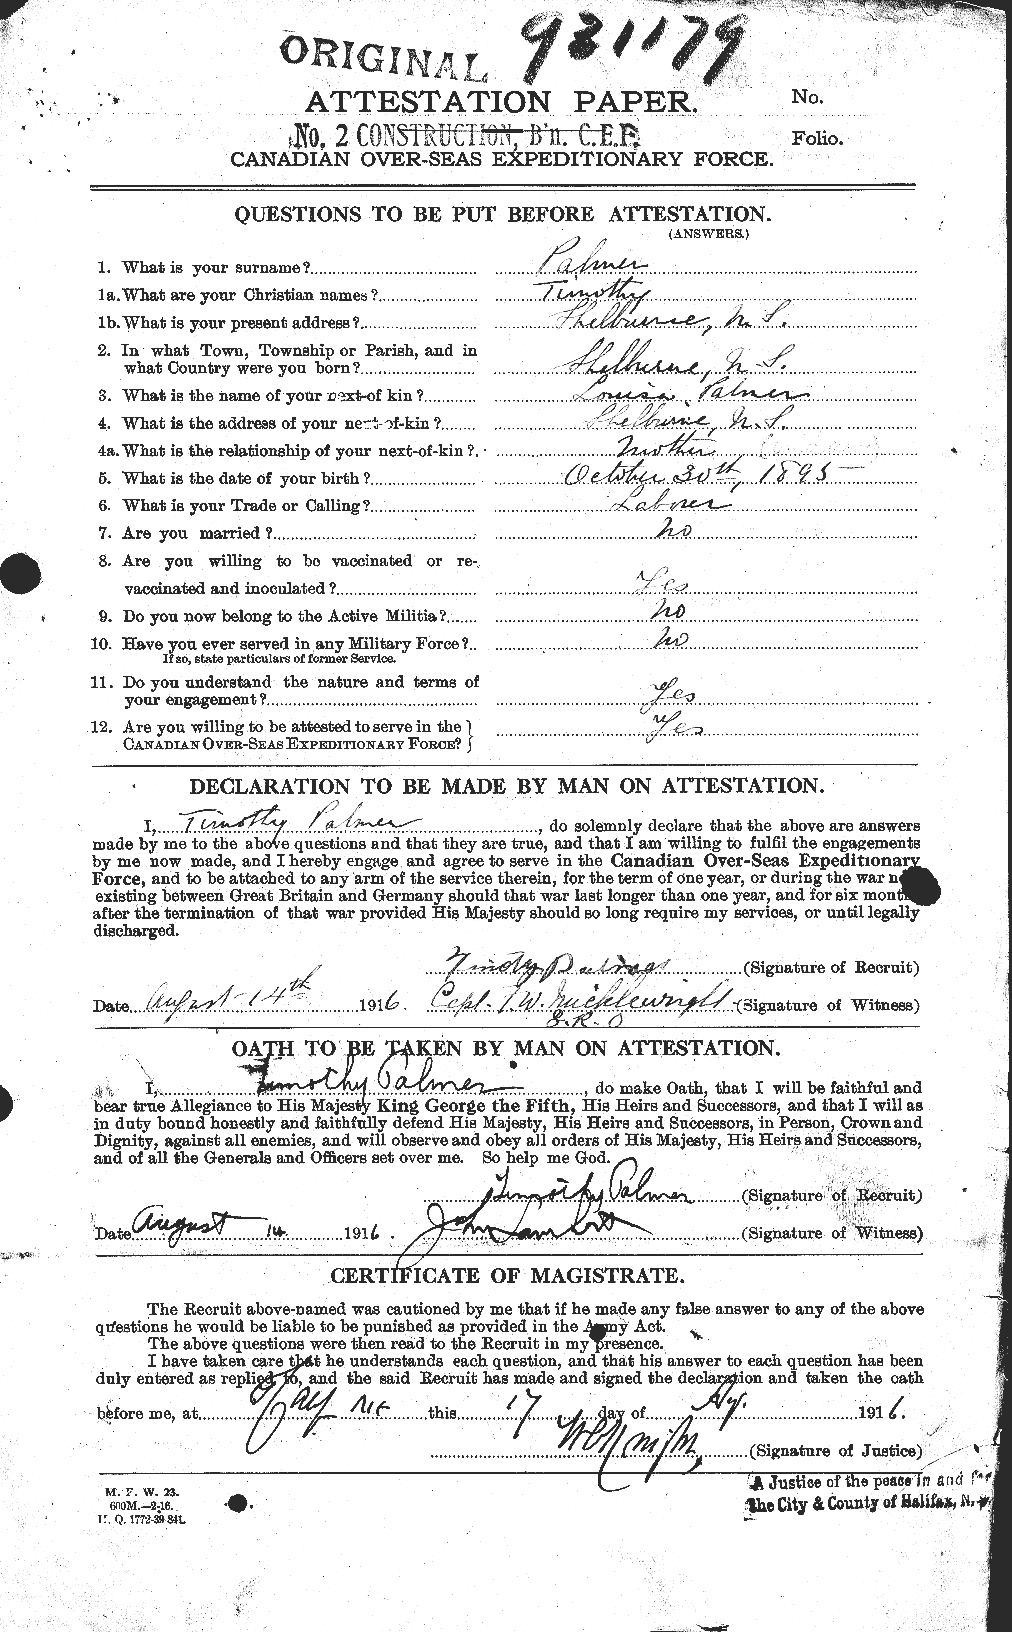 Personnel Records of the First World War - CEF 563179a